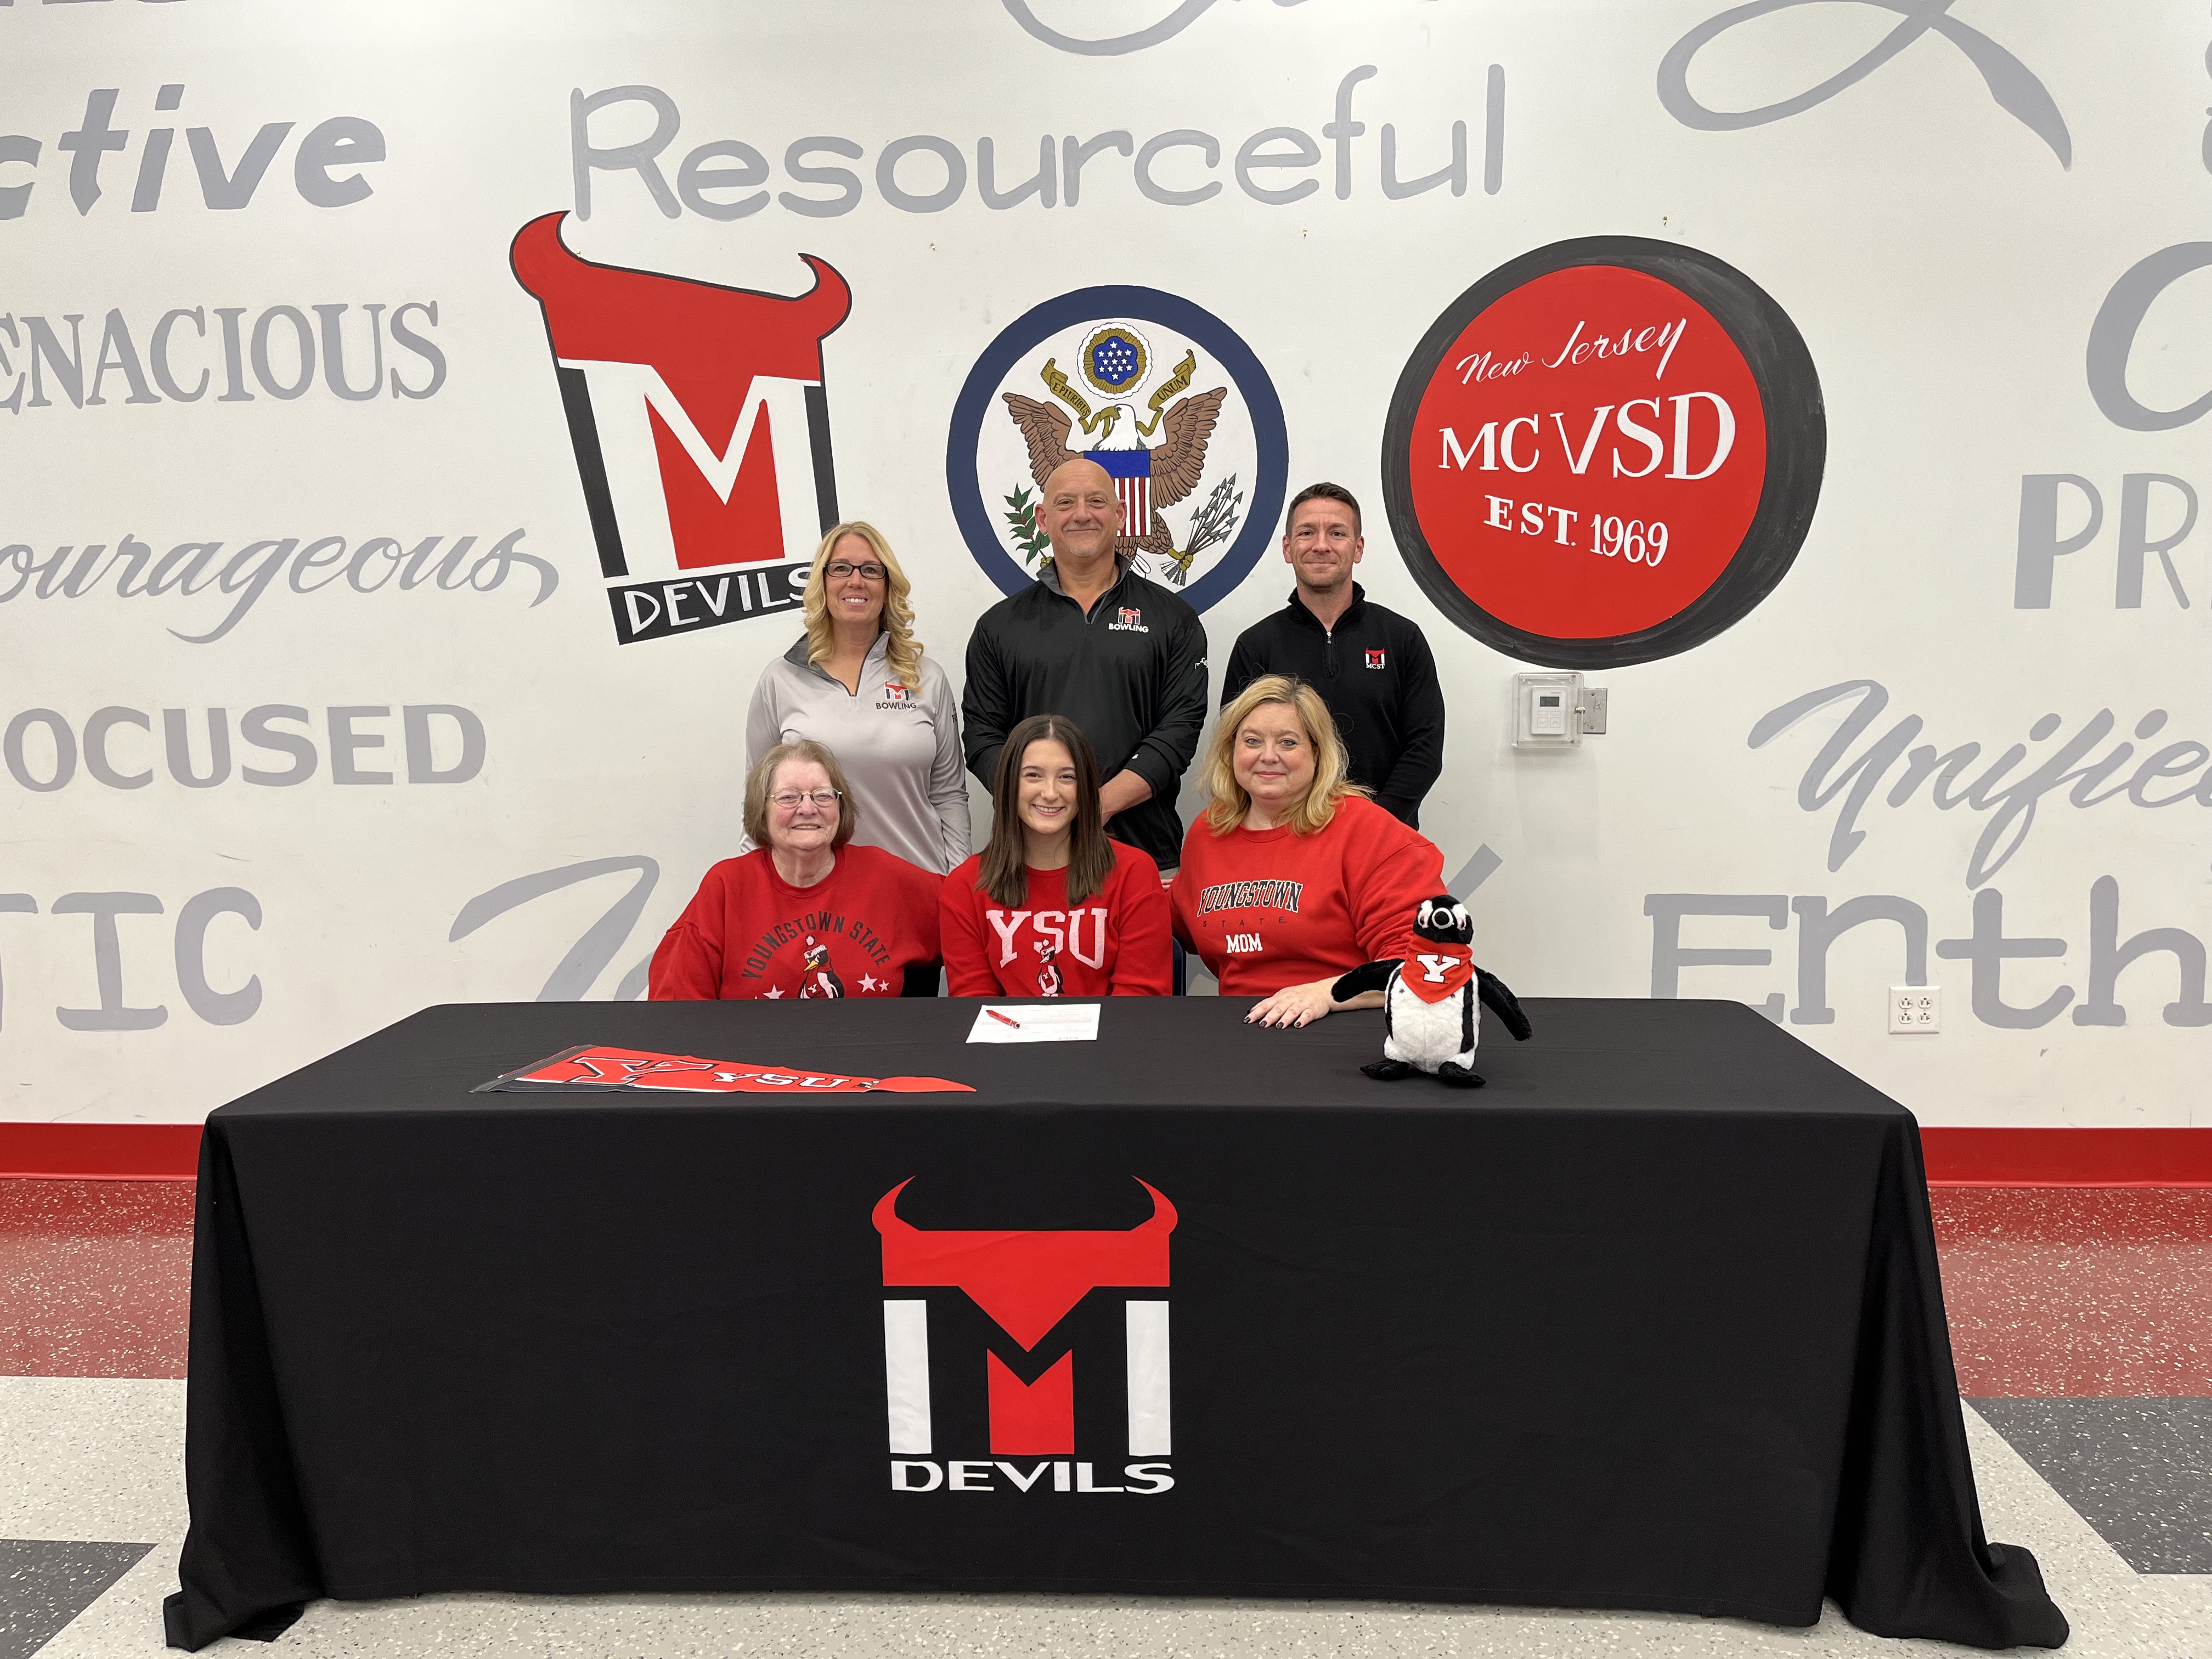 Amanda Granata will be attending Youngstown State University on a bowling scholarship.
Pictured in the front (L to R):
Cathy Granata (grandmother), Amanda Granata, Theresa Granata (mother)
Pictured in the back (L to R):
Colleen PAscale (asst coach), Lou Rosso (Head coach), Mark Menadier (AD)